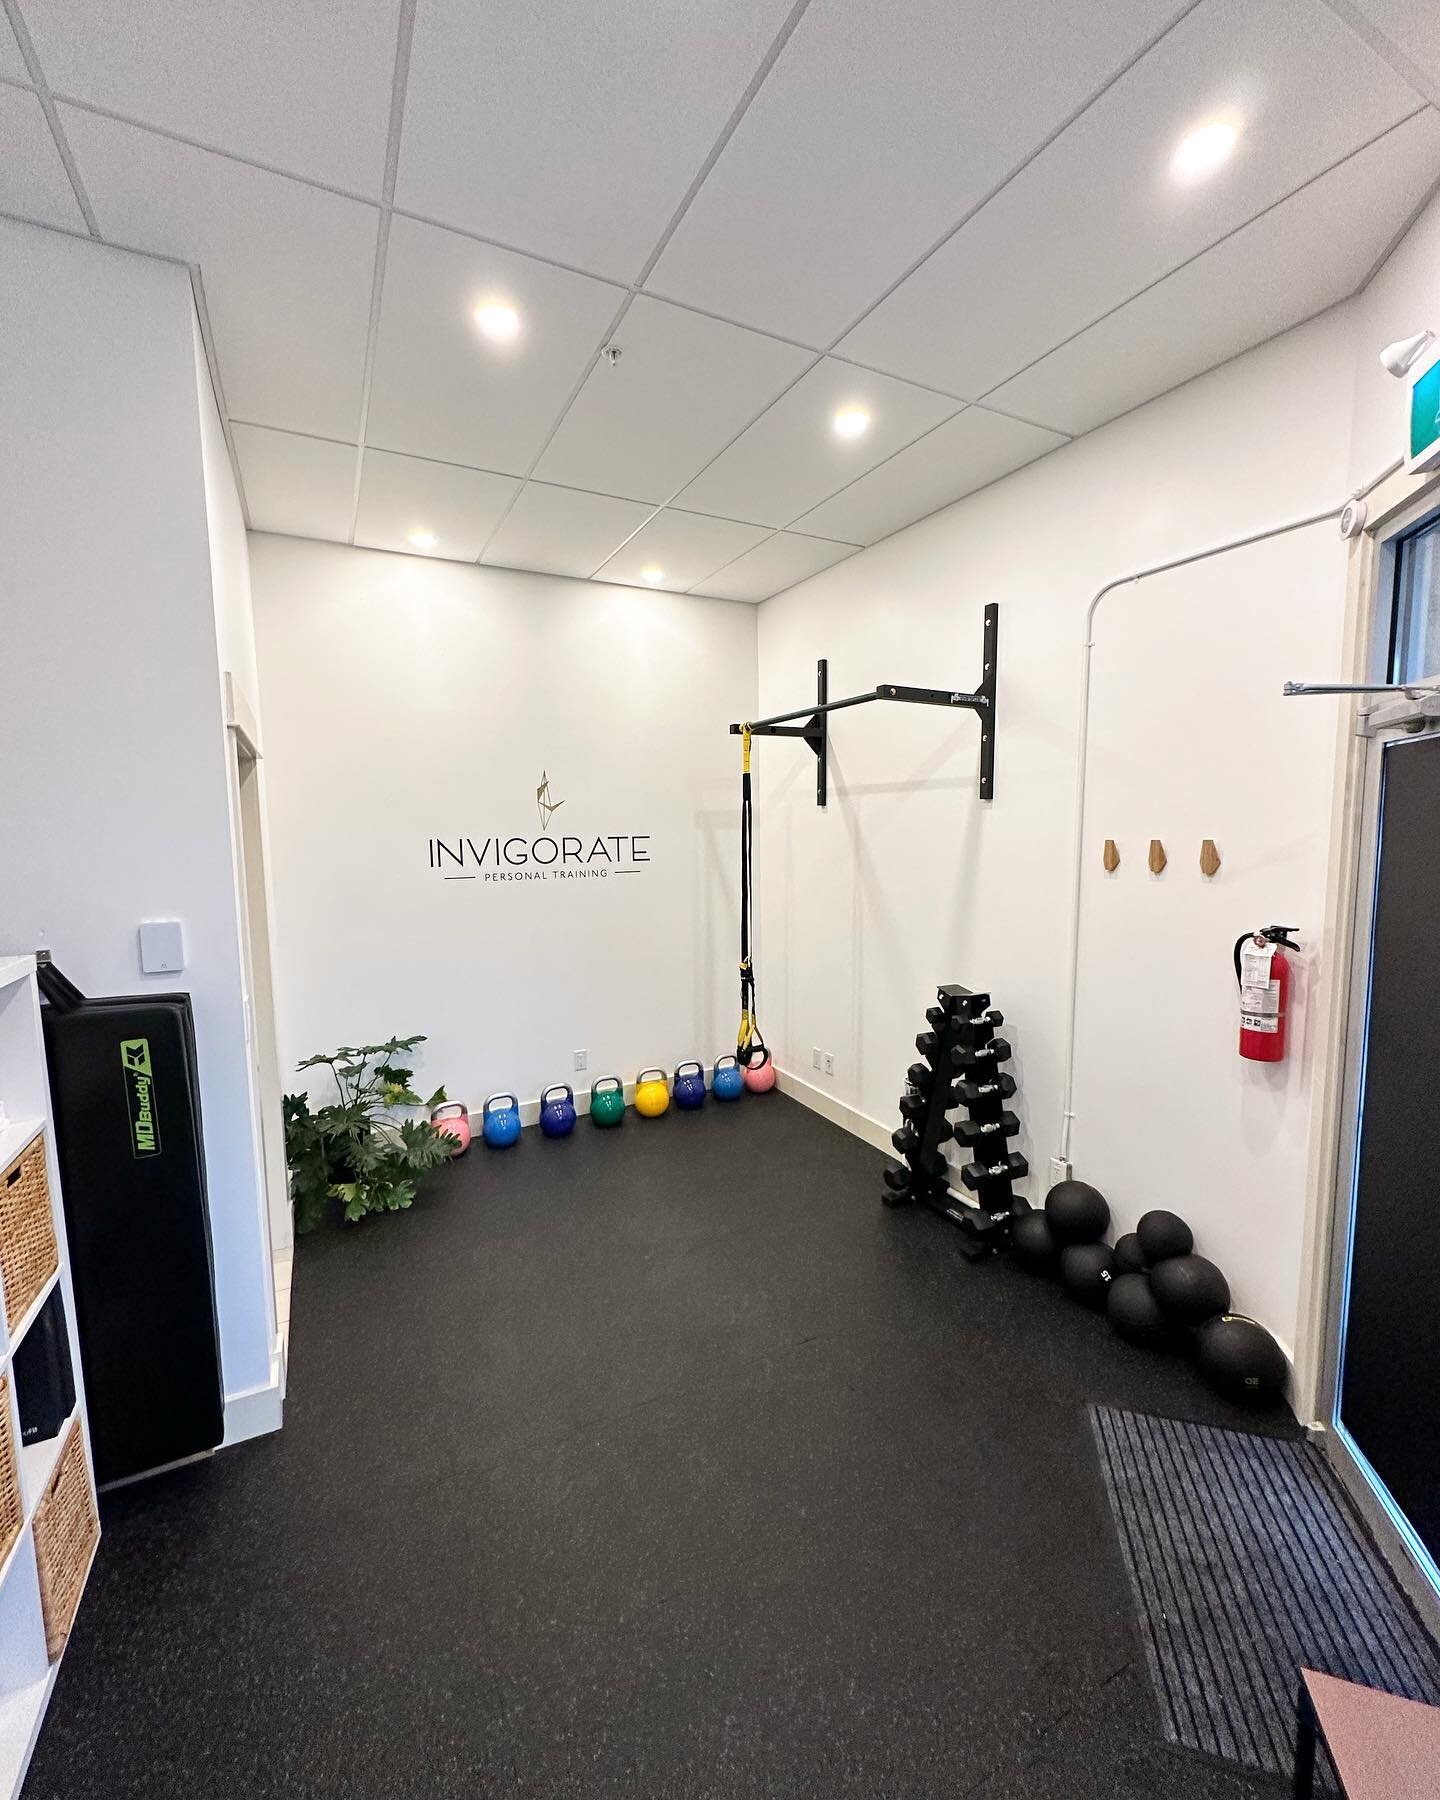 Did you know you can rent our studio? 

✨ Calling all Personal Trainers, Yoga Instructors and Energy Healers! 

Our studio is available to rent by the hour and allows for a completely private experience. More info 👇

🔸 1:1 PT or Yoga sessions

🔸 D